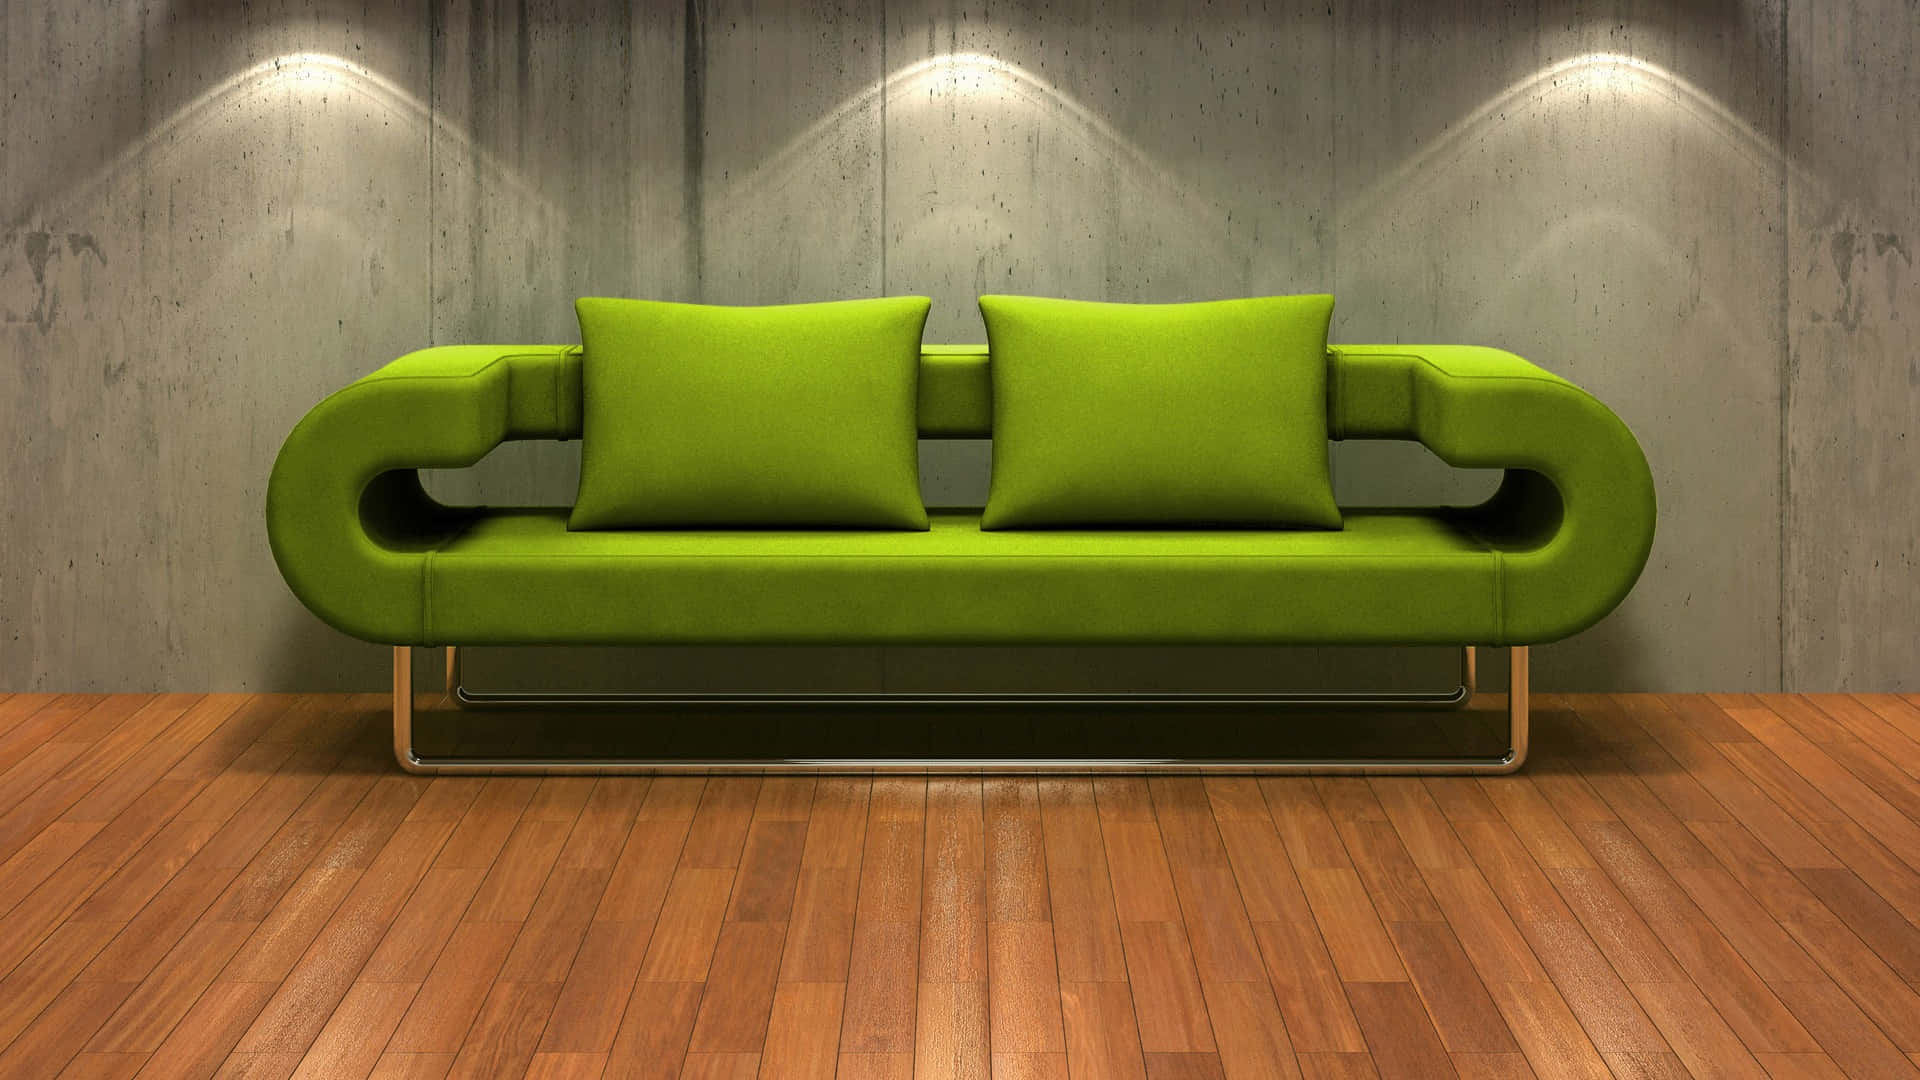 Furniture Interion Design Couch Background